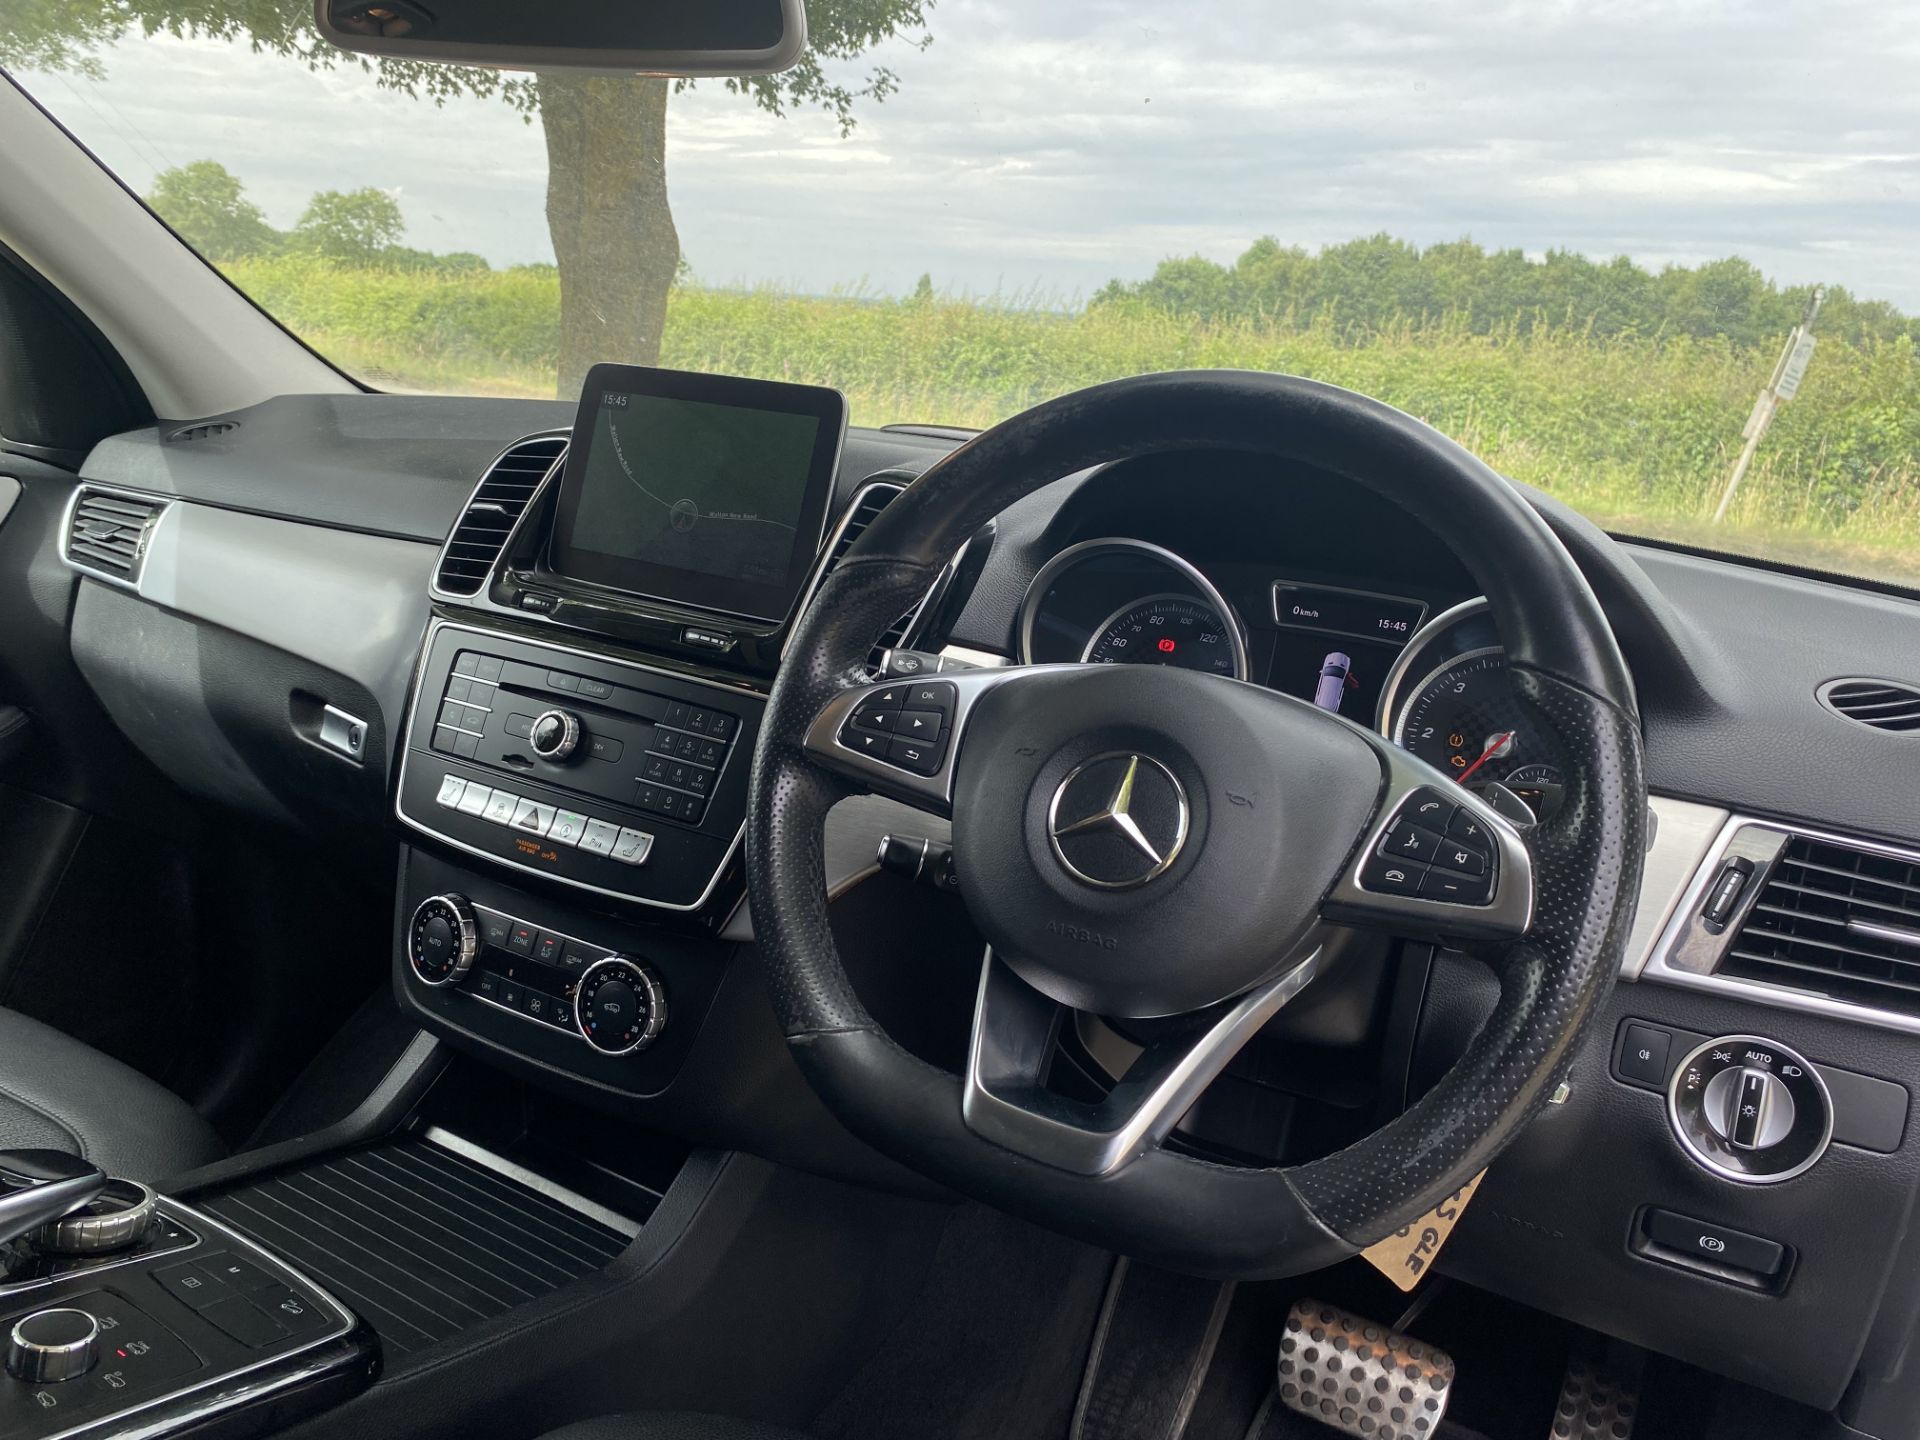 MERCEDES GLE 250d AMG-LINE "NIGHT EDITION" AUTO - 17 REG - 1 OWNER - FULL LEATHER - COMAND - NO VAT! - Image 35 of 36